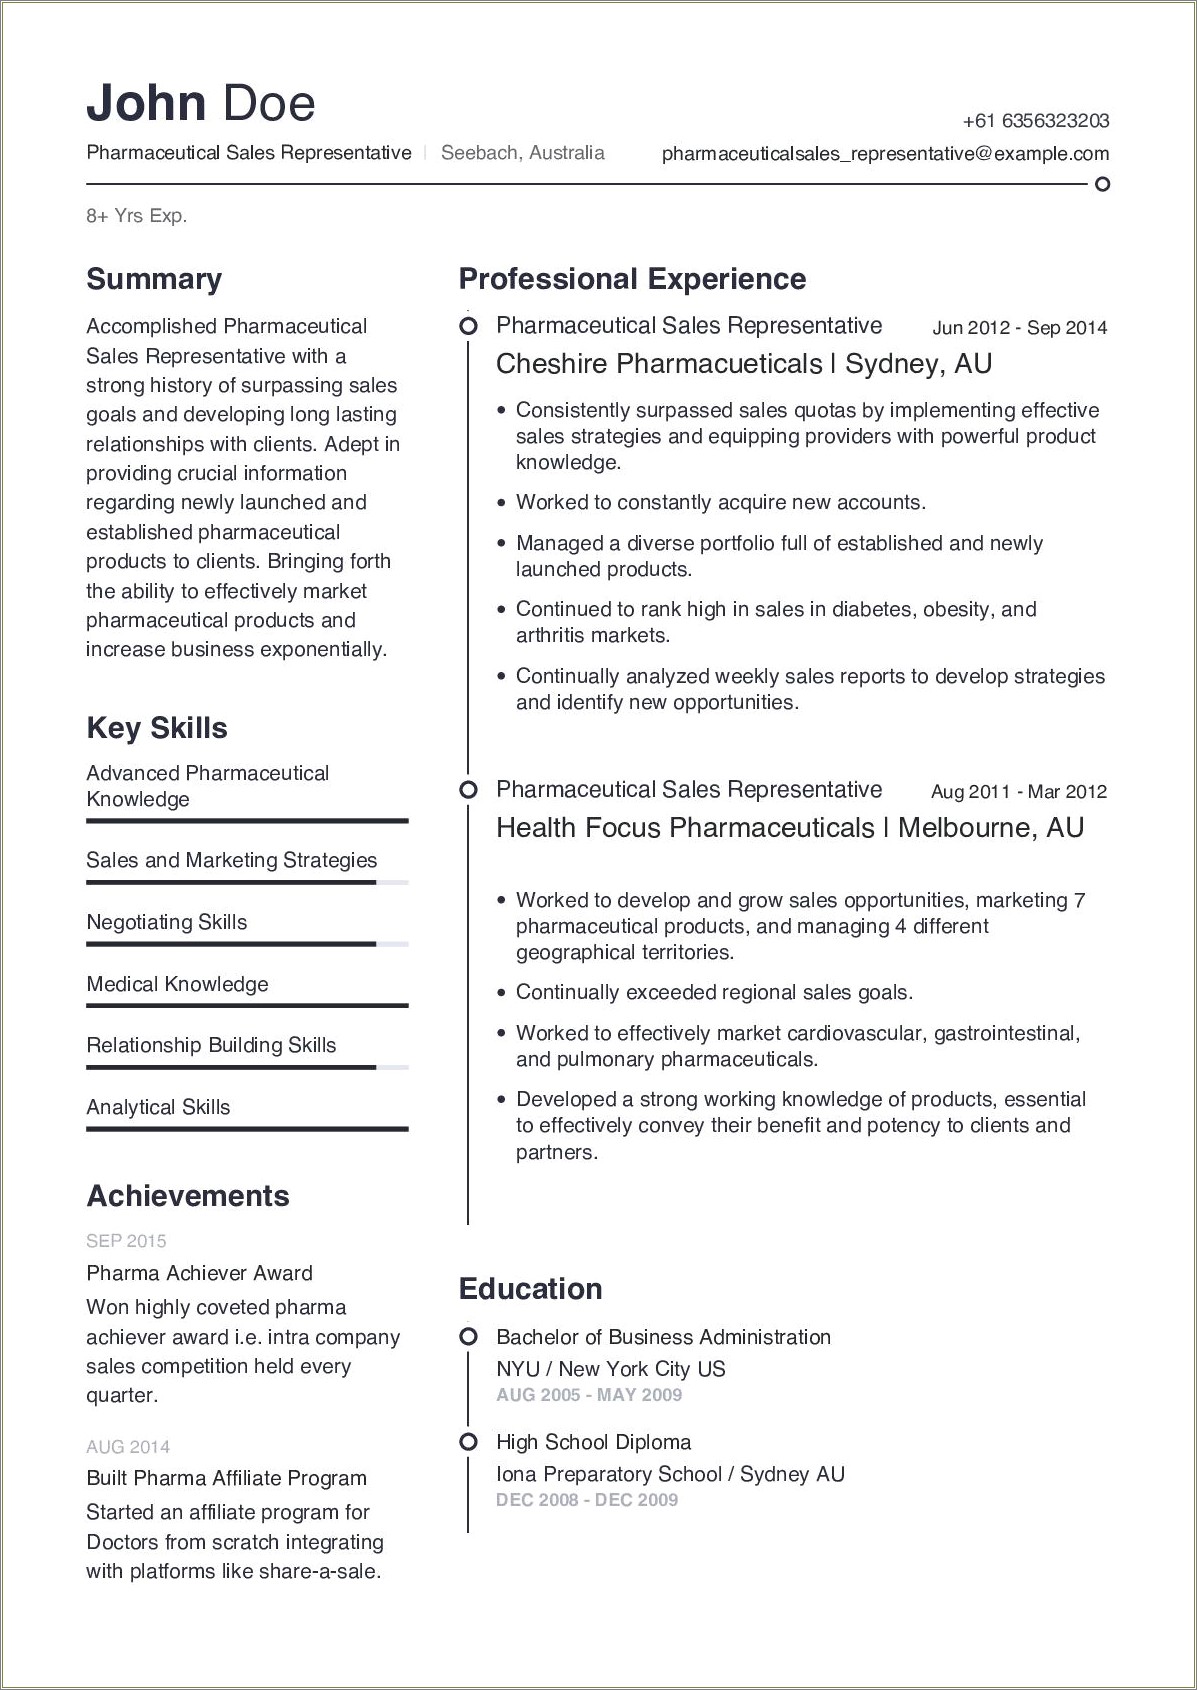 Resume Summary For Pharmaceutical Sales Rep